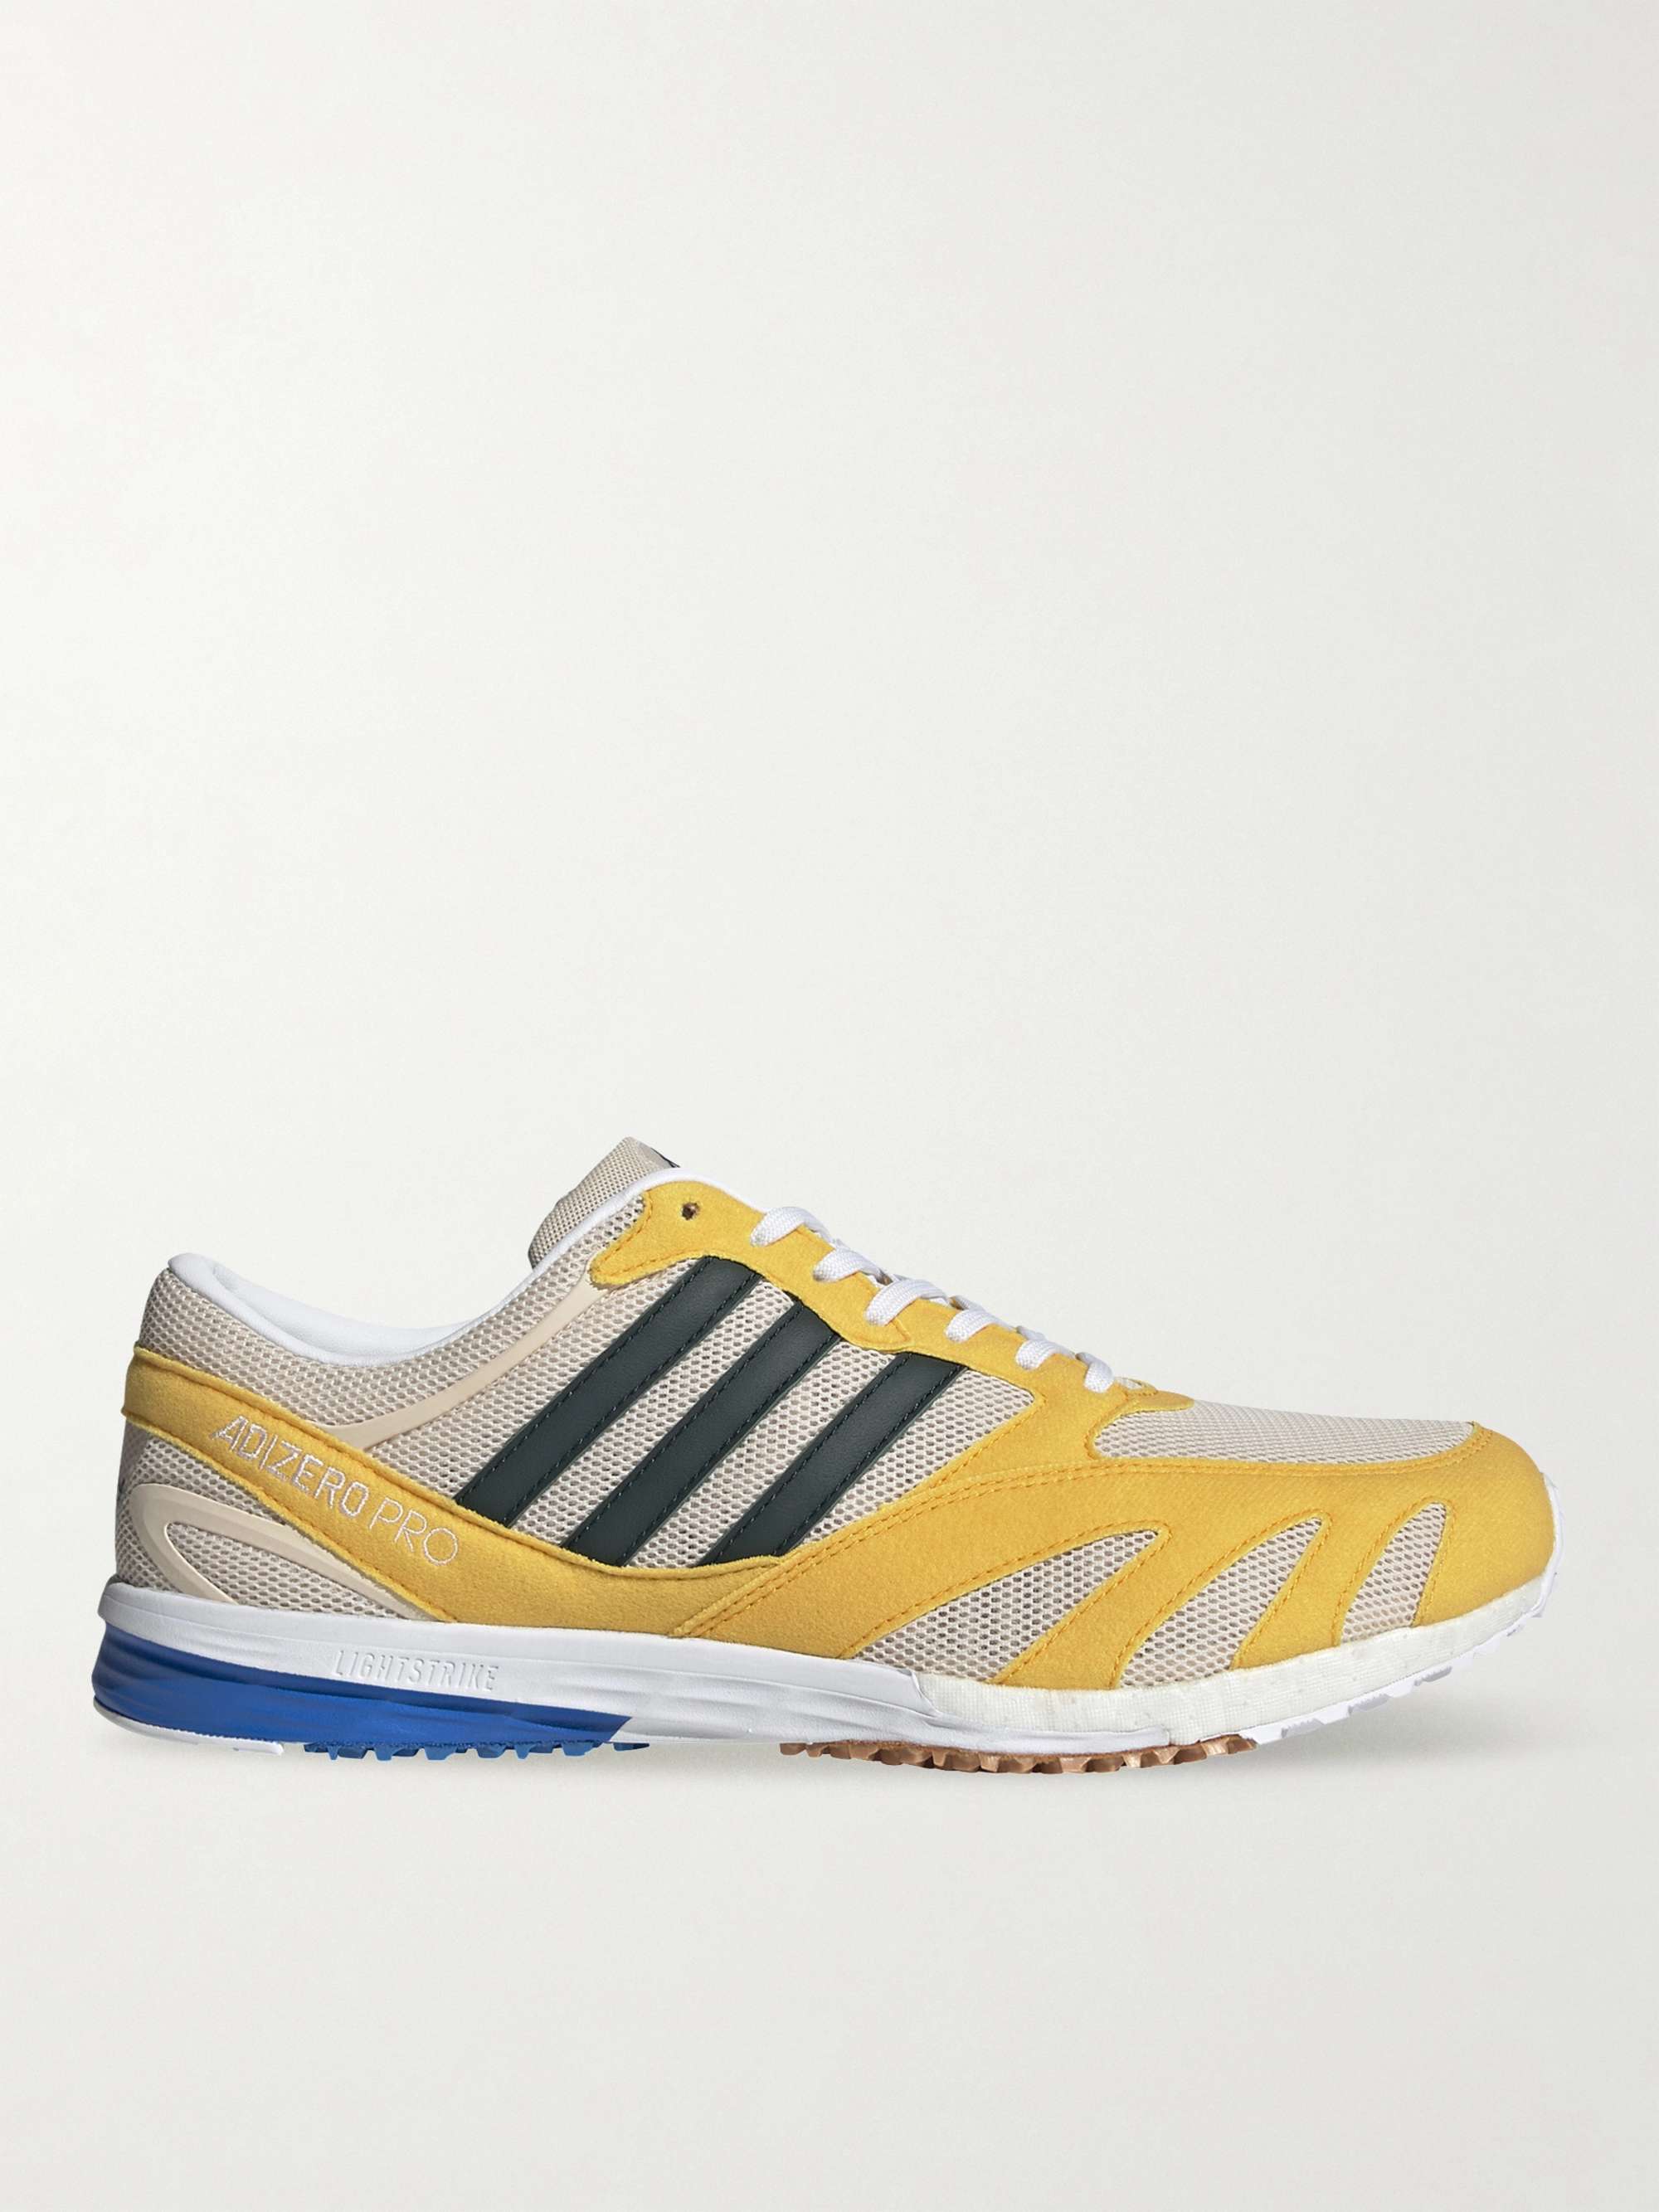 ADIDAS CONSORTIUM + Noah Lab Race Leather-Trimmed Mesh and Faux Suede  Sneakers | MR PORTER